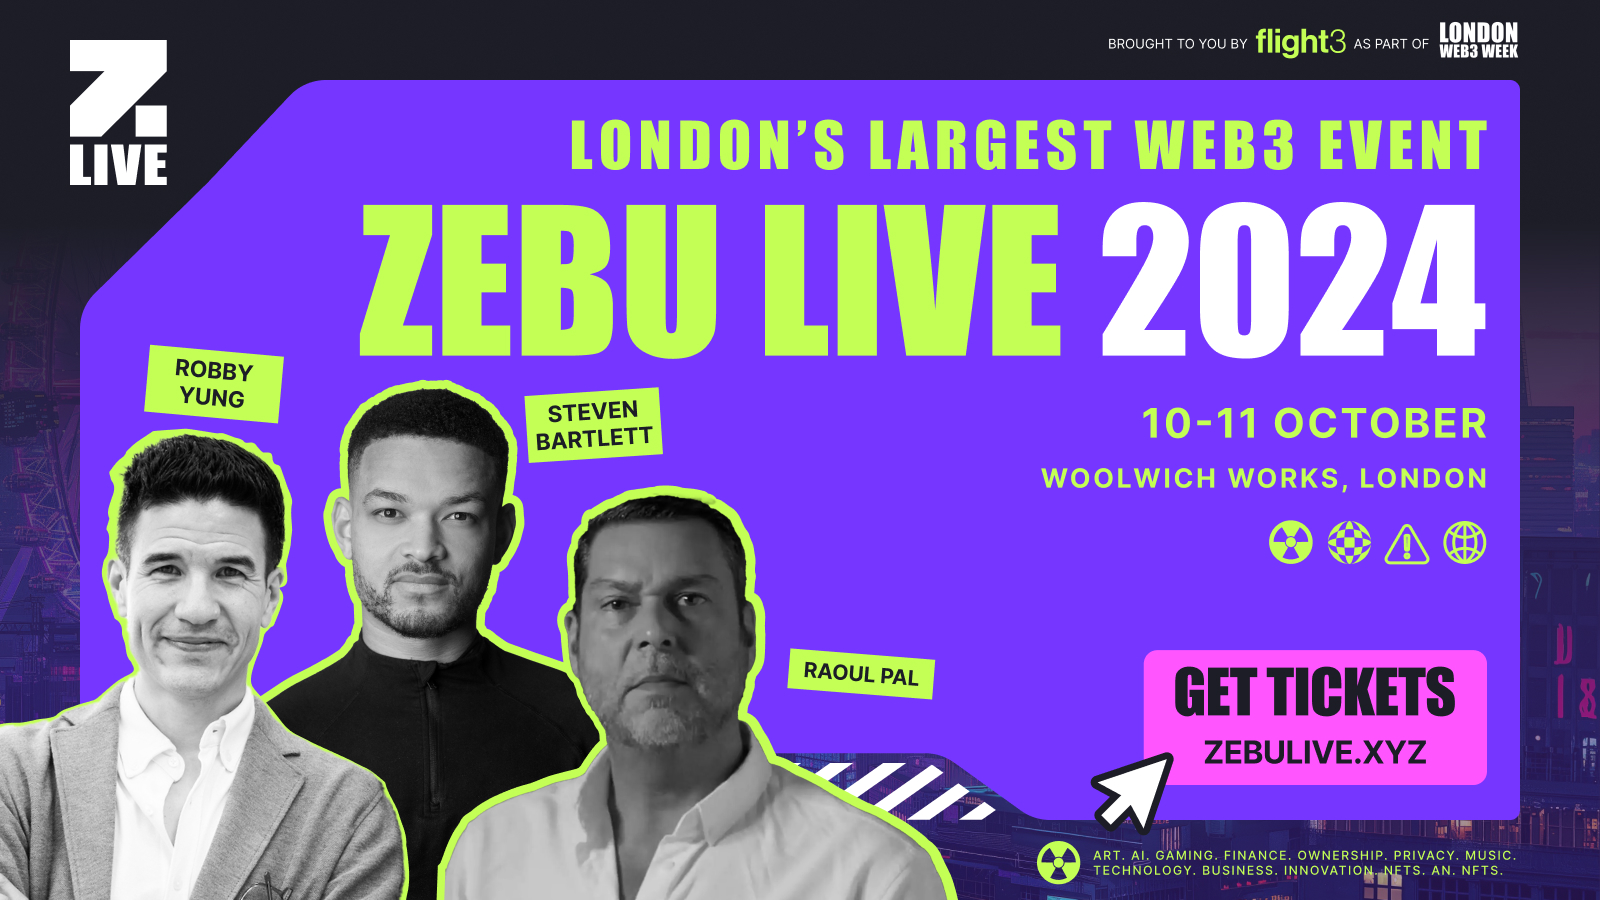 Zebu Live 2024: The UK’s Premier Web3 Conference Returns with Steven Bartlett, Coinbase, Solana, and More